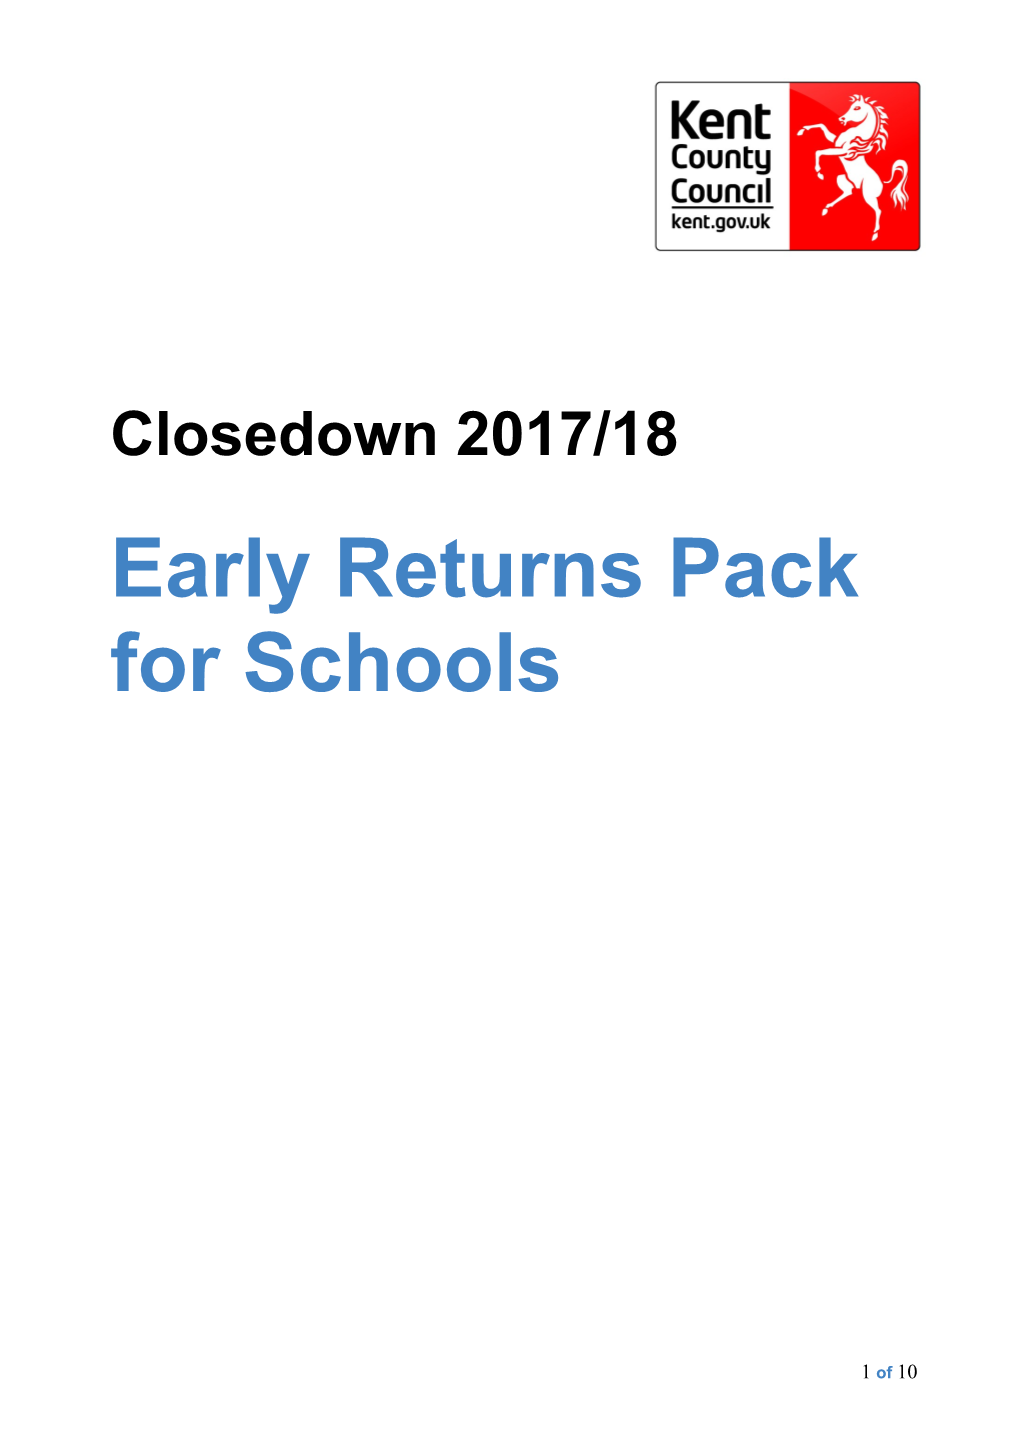 Early Returns Pack for Schools